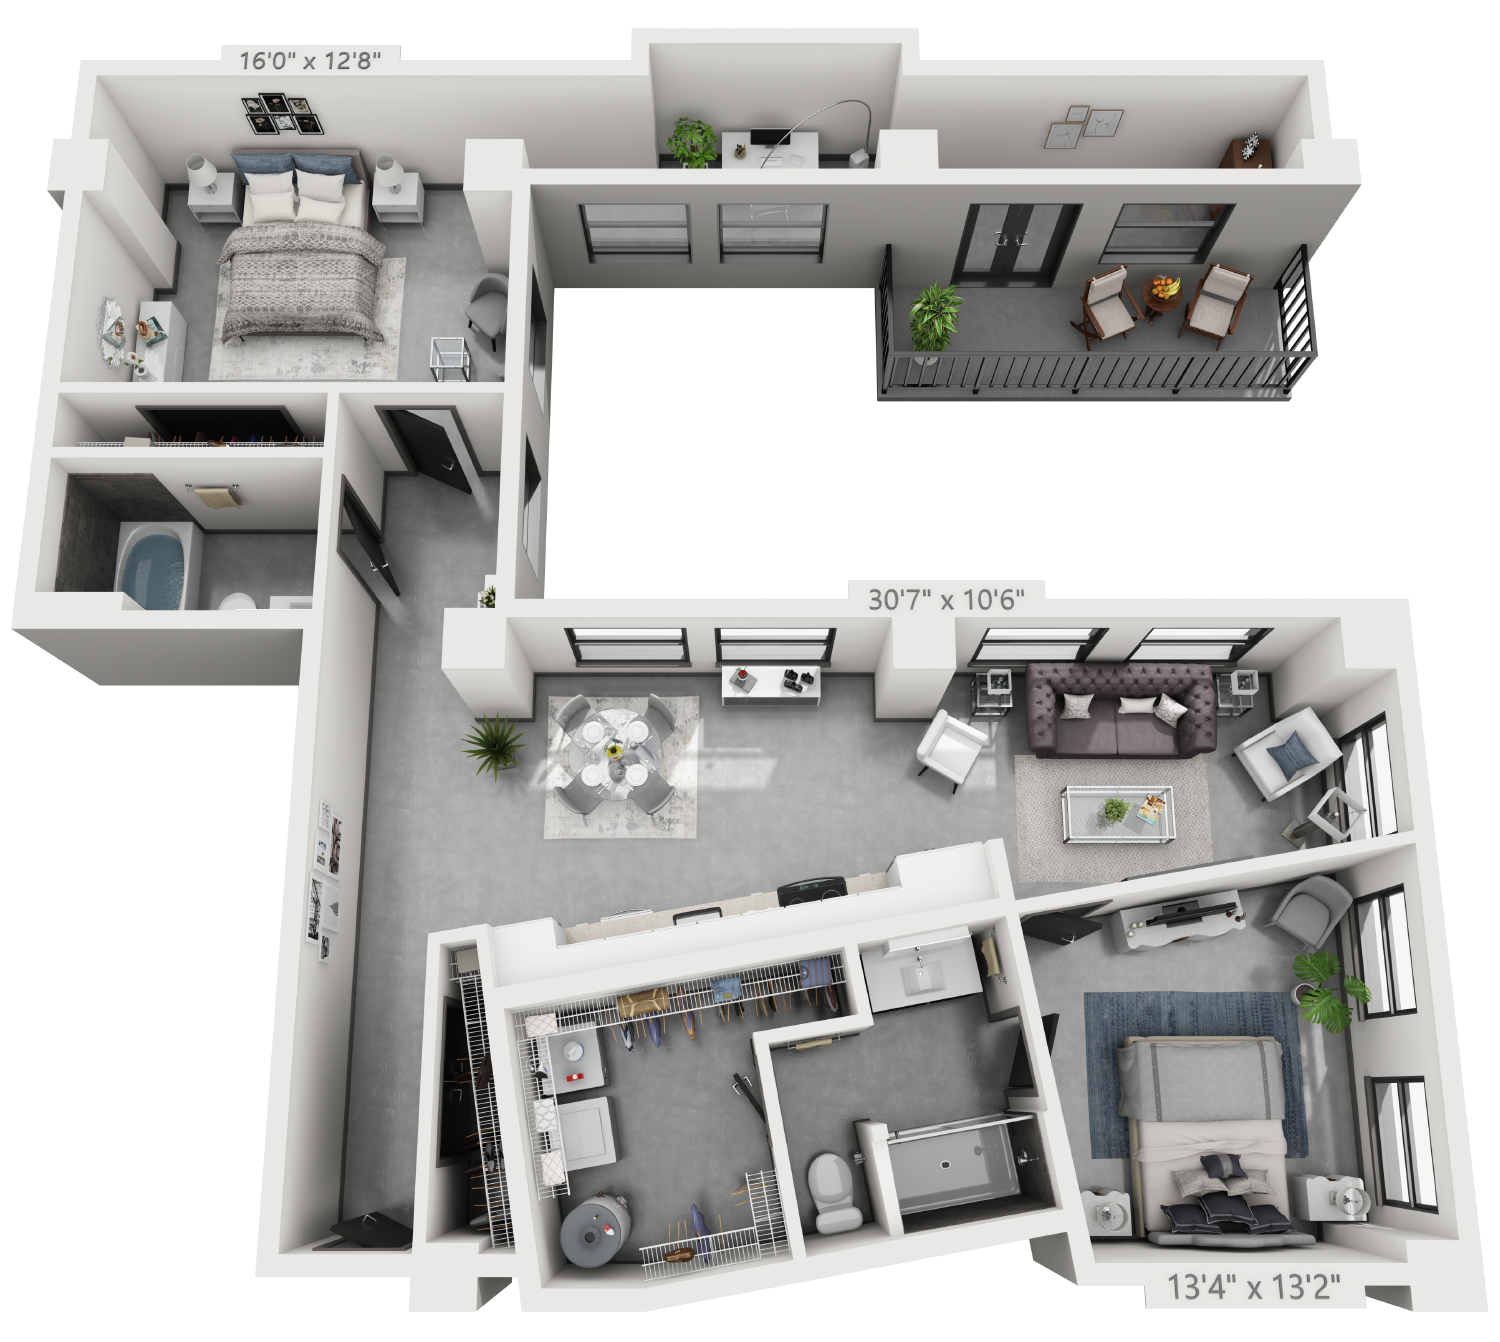 B8 plan is 2 bed, 2 bath and 1,330 square feet